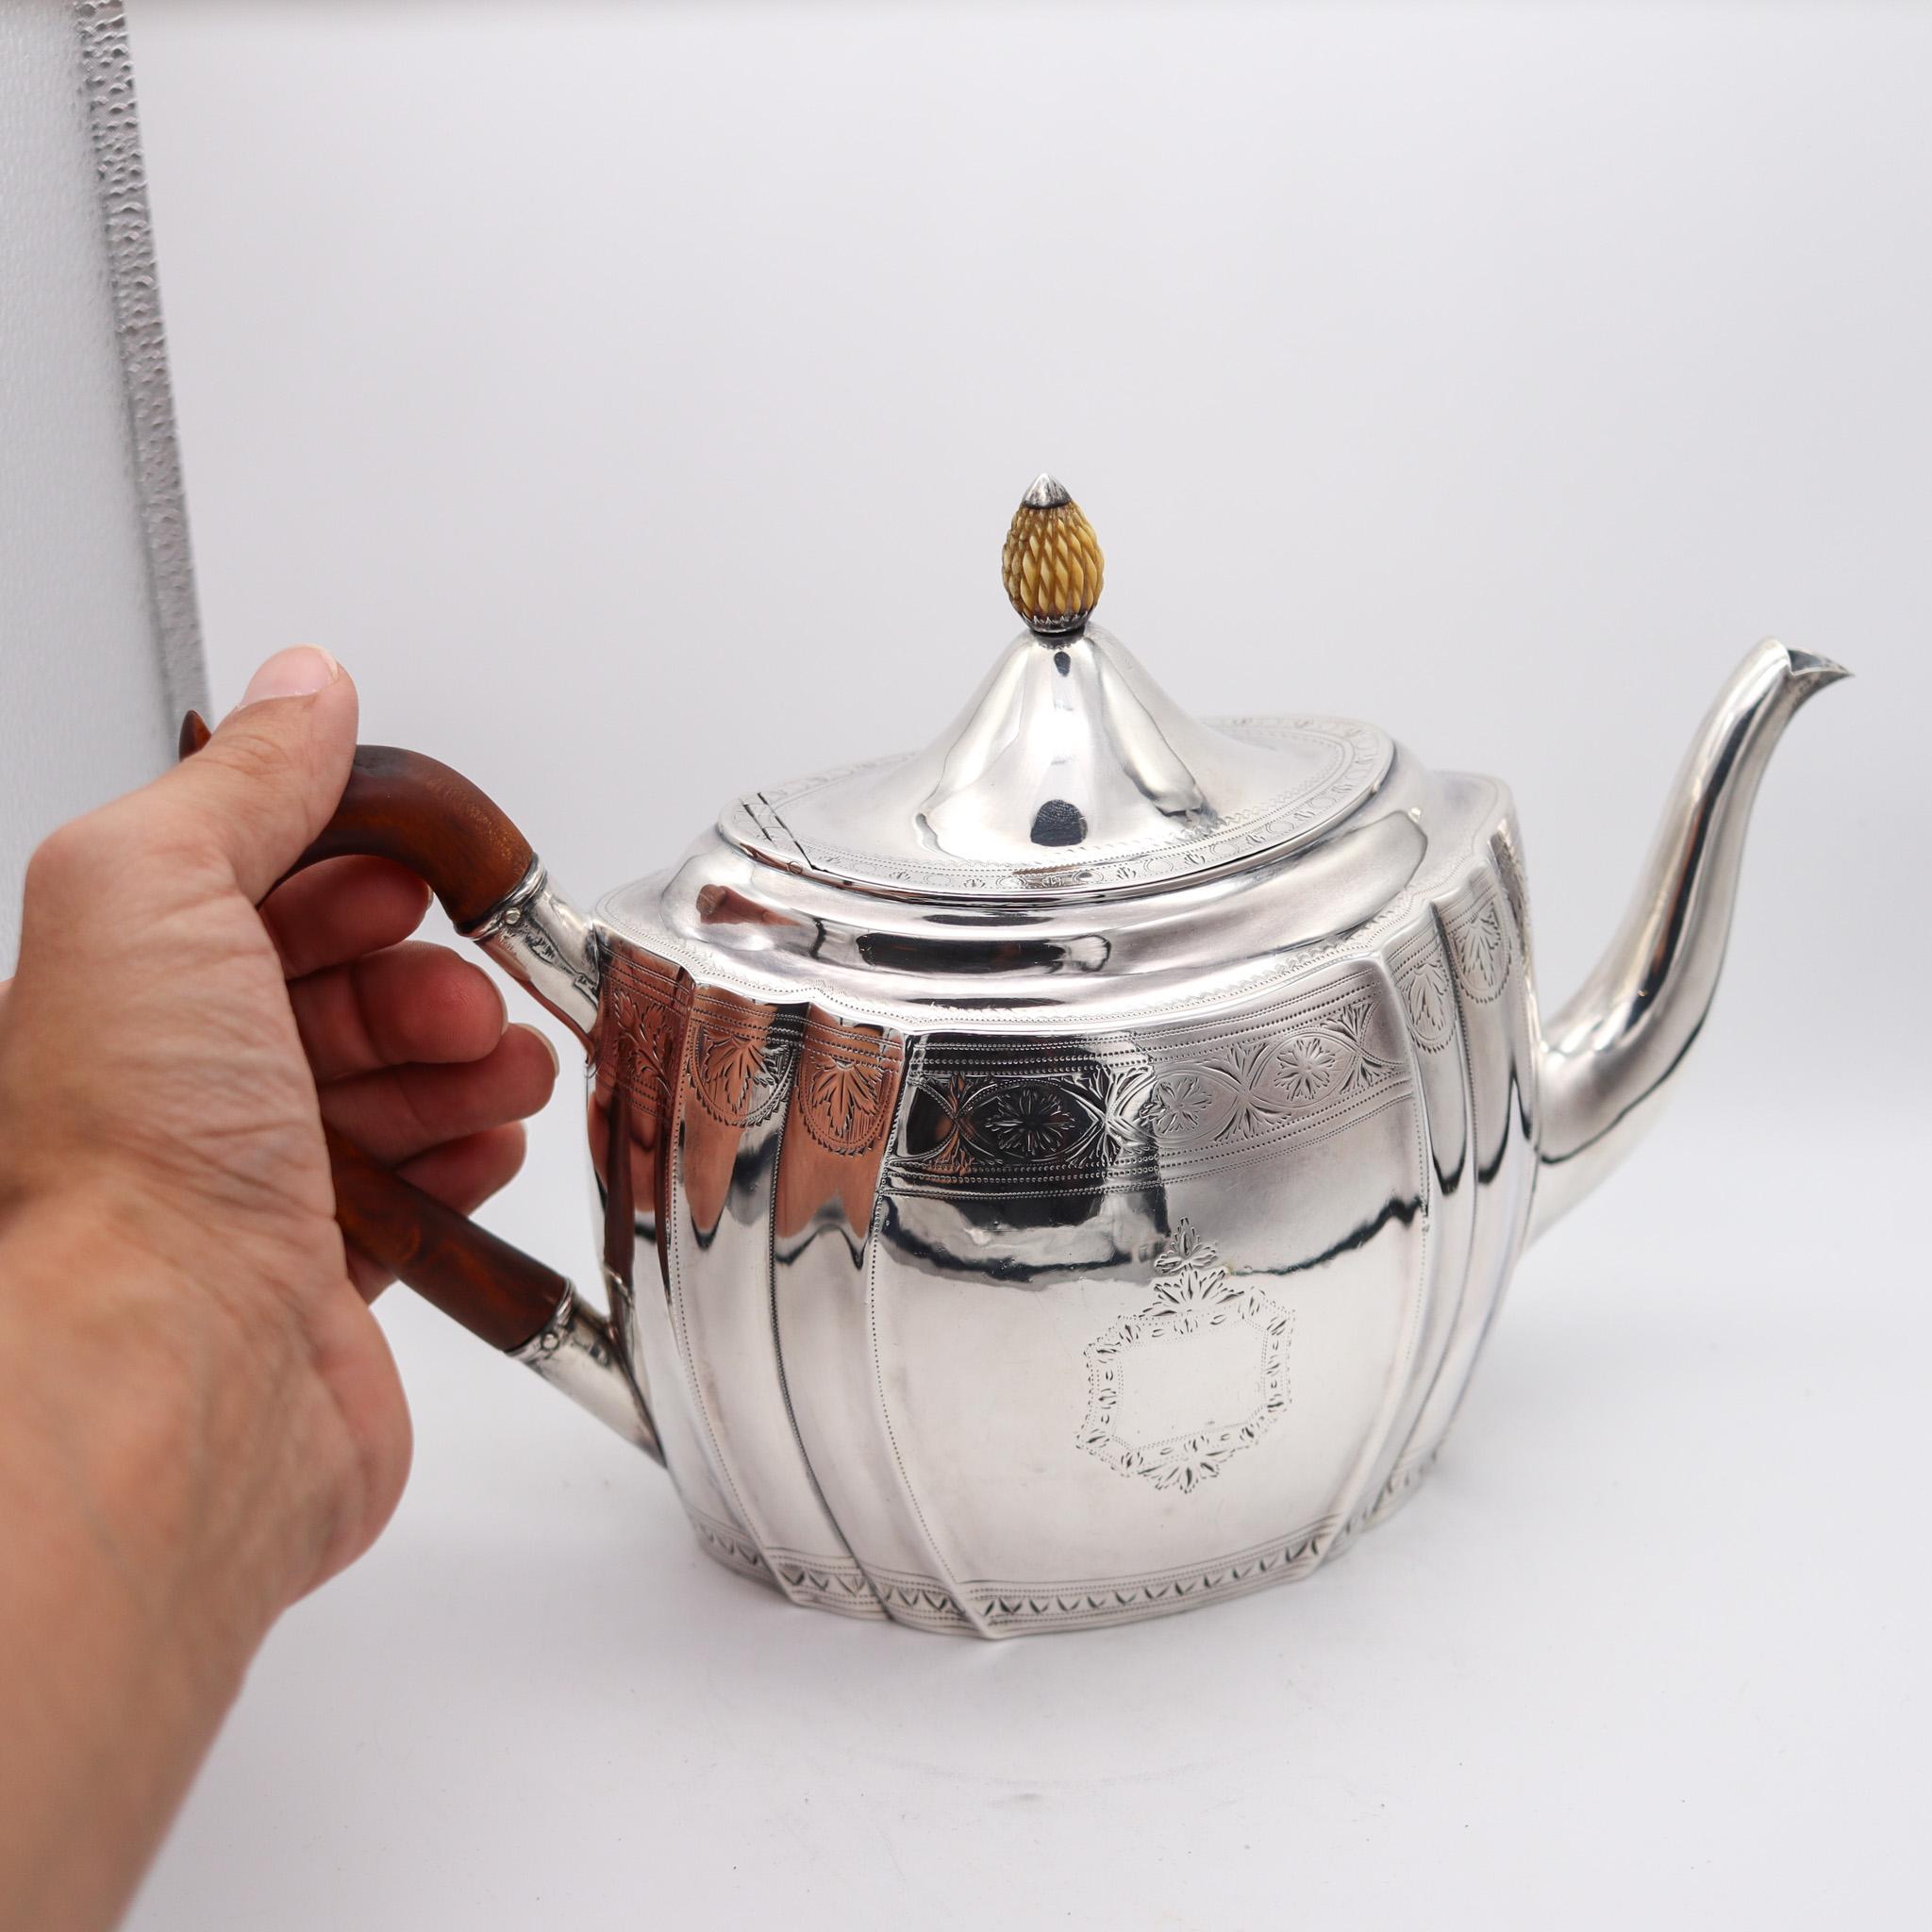 Richard Sawyer 1801 Dublin Coffee-Tea Pot In 925 Sterling Silver With Brown Wood For Sale 1